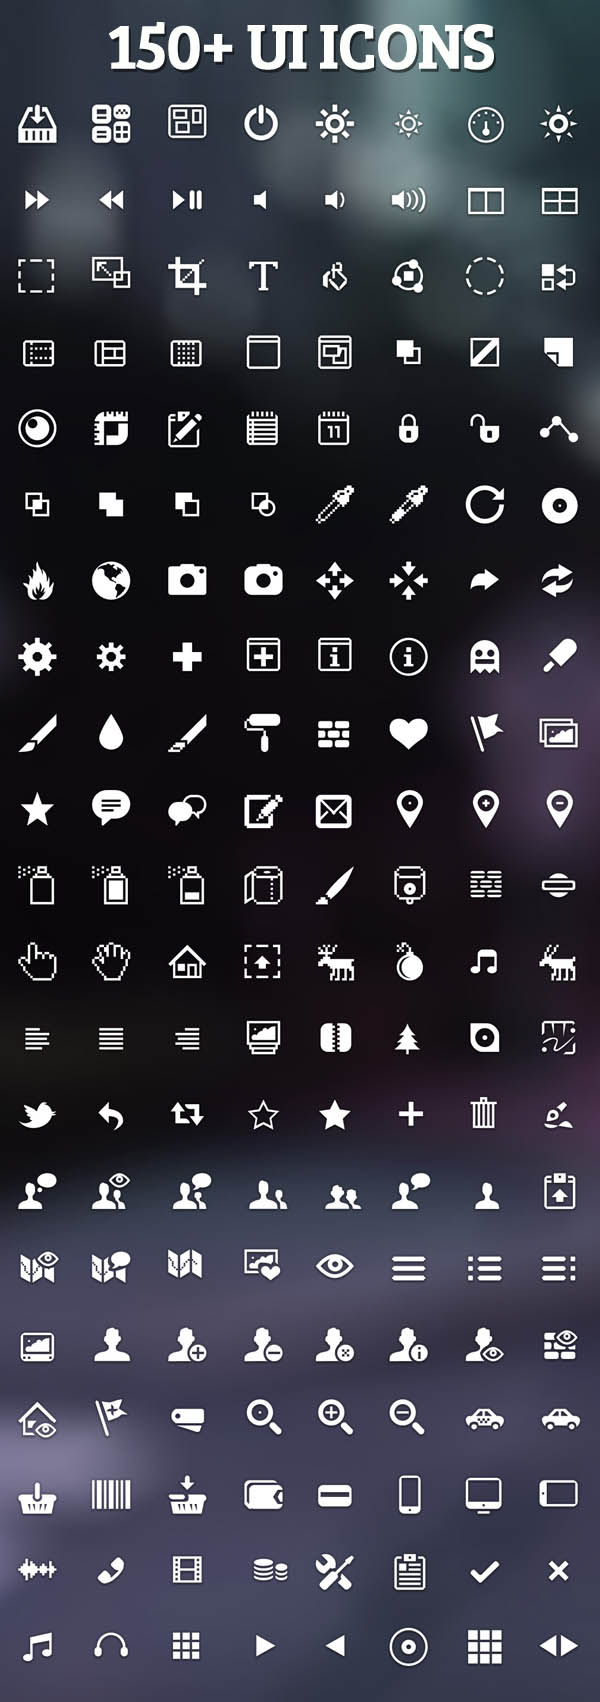 Psd UI Icons - Preview